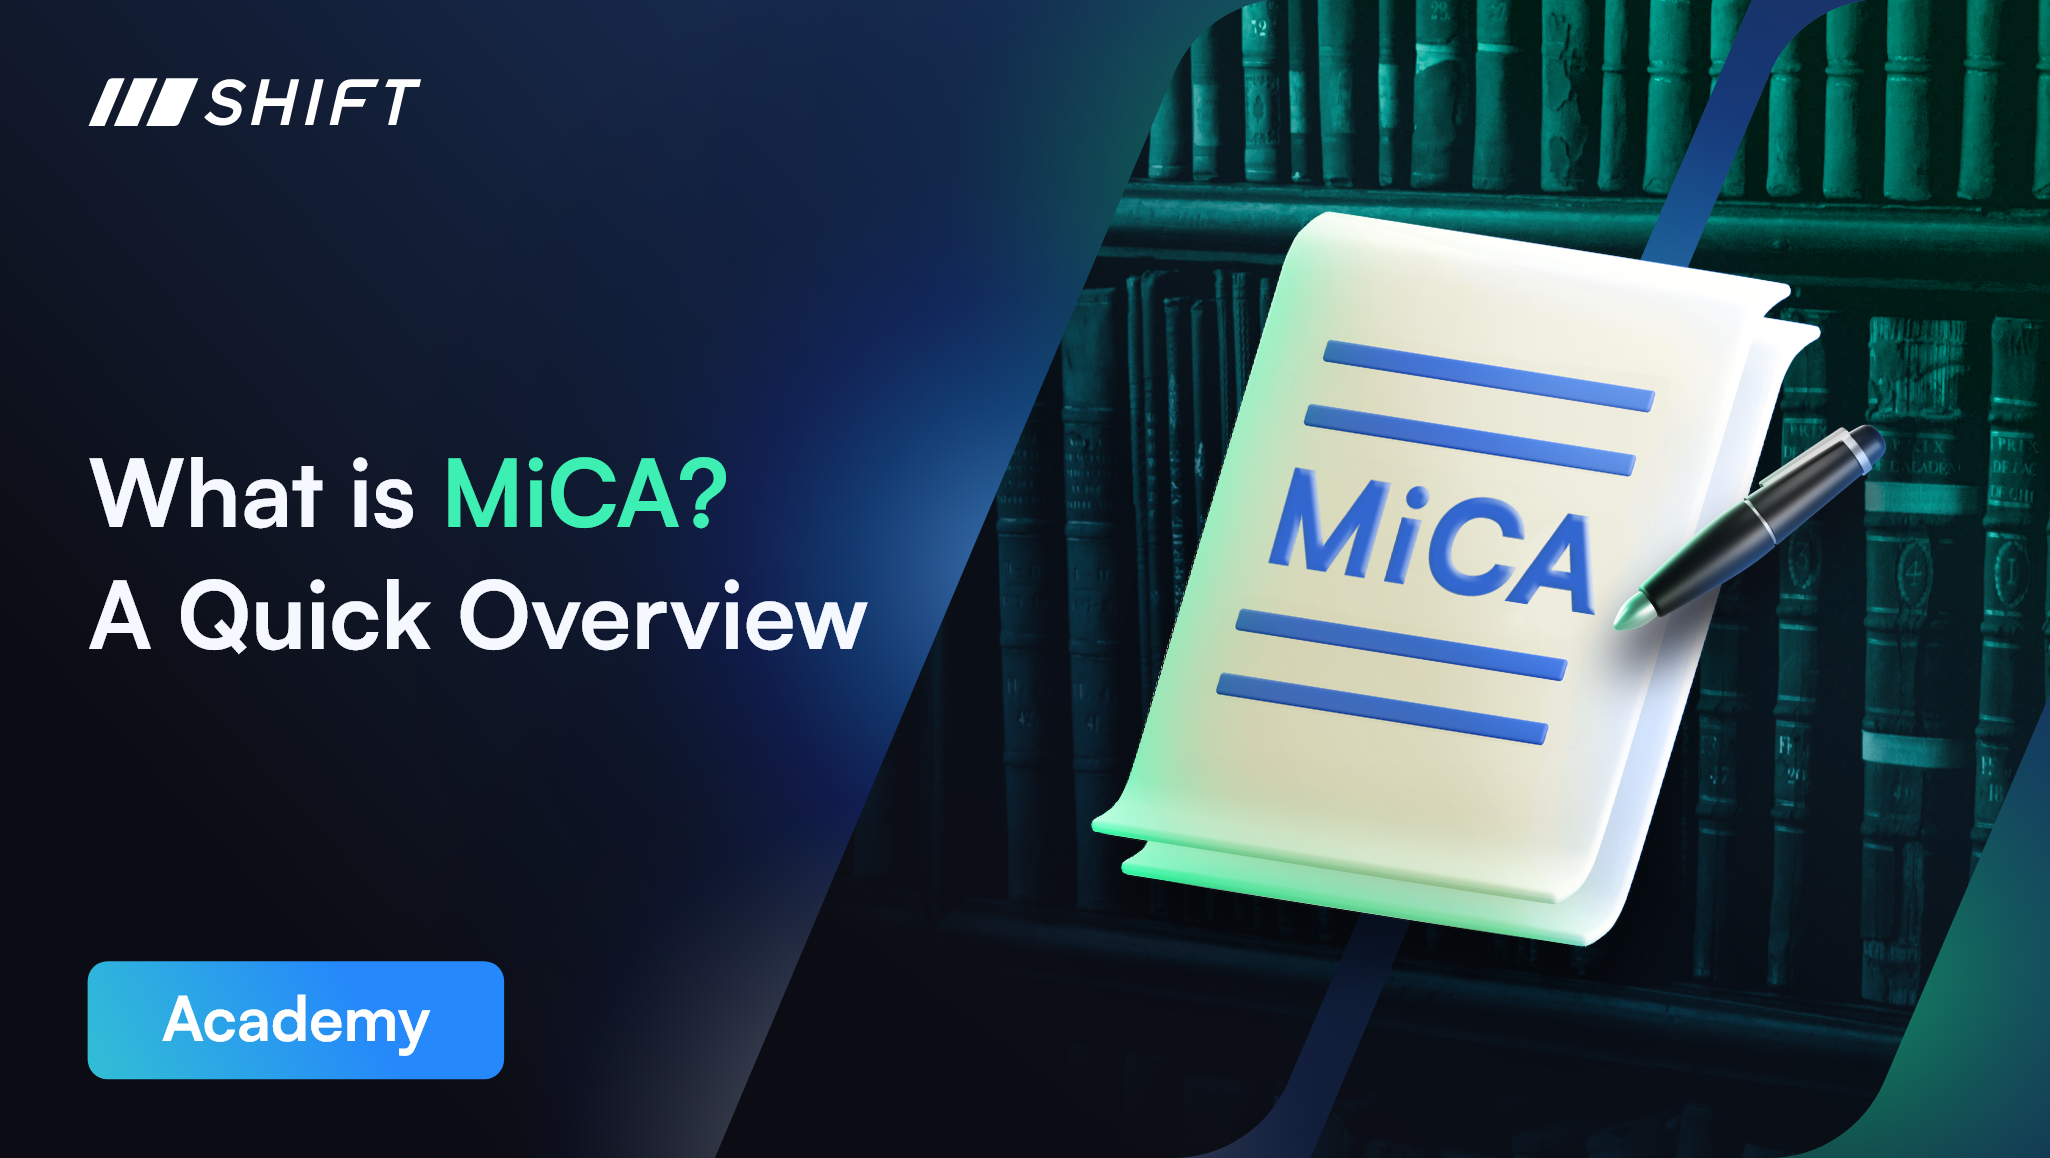 Get fully up to speed on MiCa Regulation with Shift Markets.